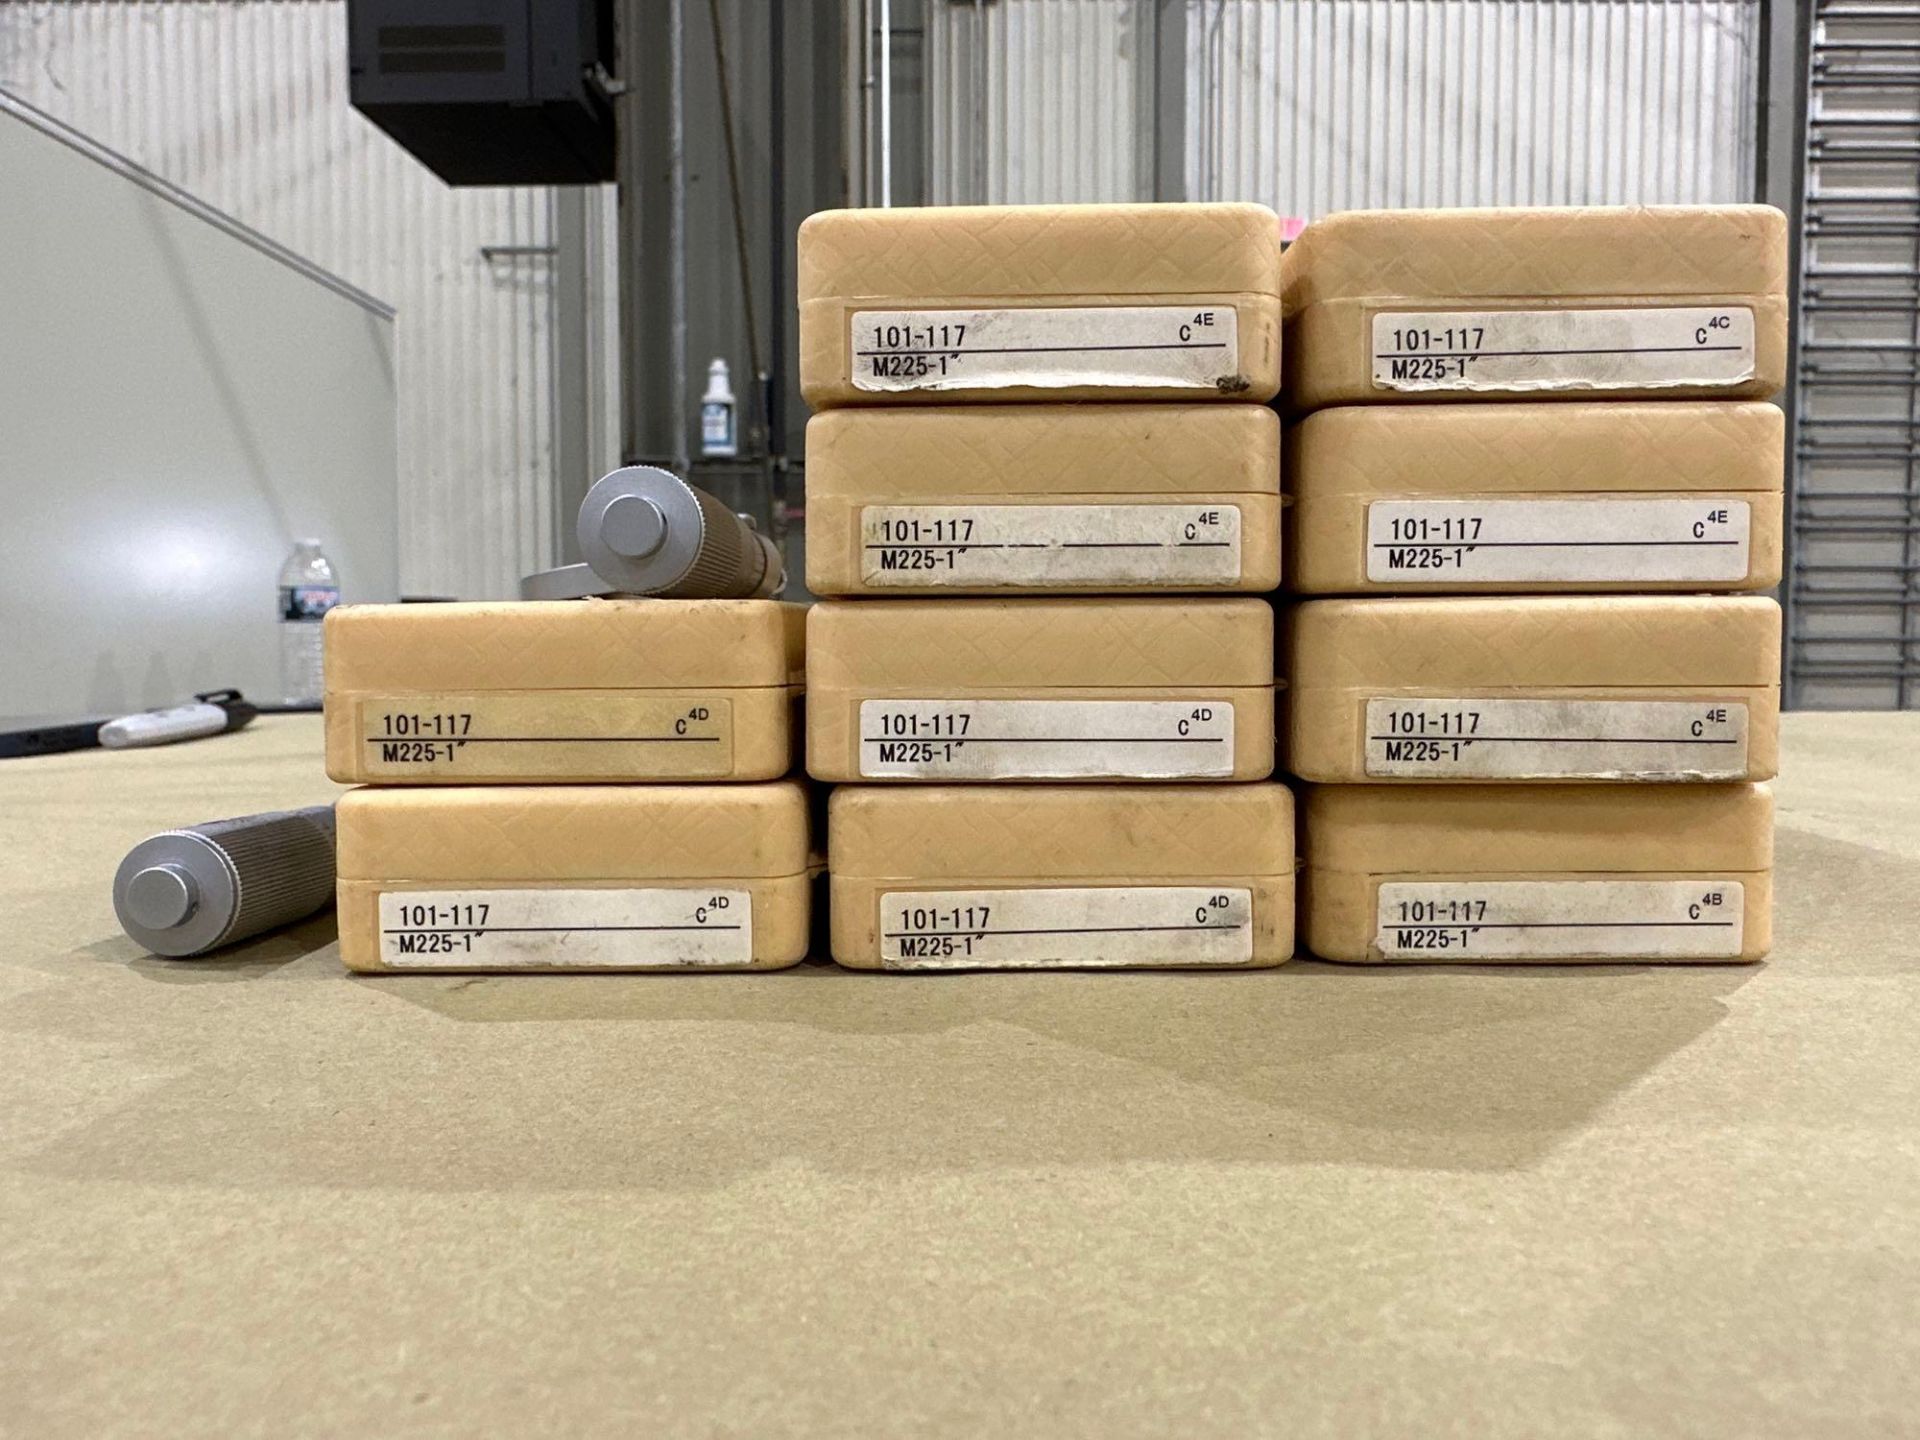 Lot of 12: Mitutoyo Mechanical OD Micrometer M225-1”, 0-1” Range, .0001” Graduation in plastic boxes - Image 3 of 7